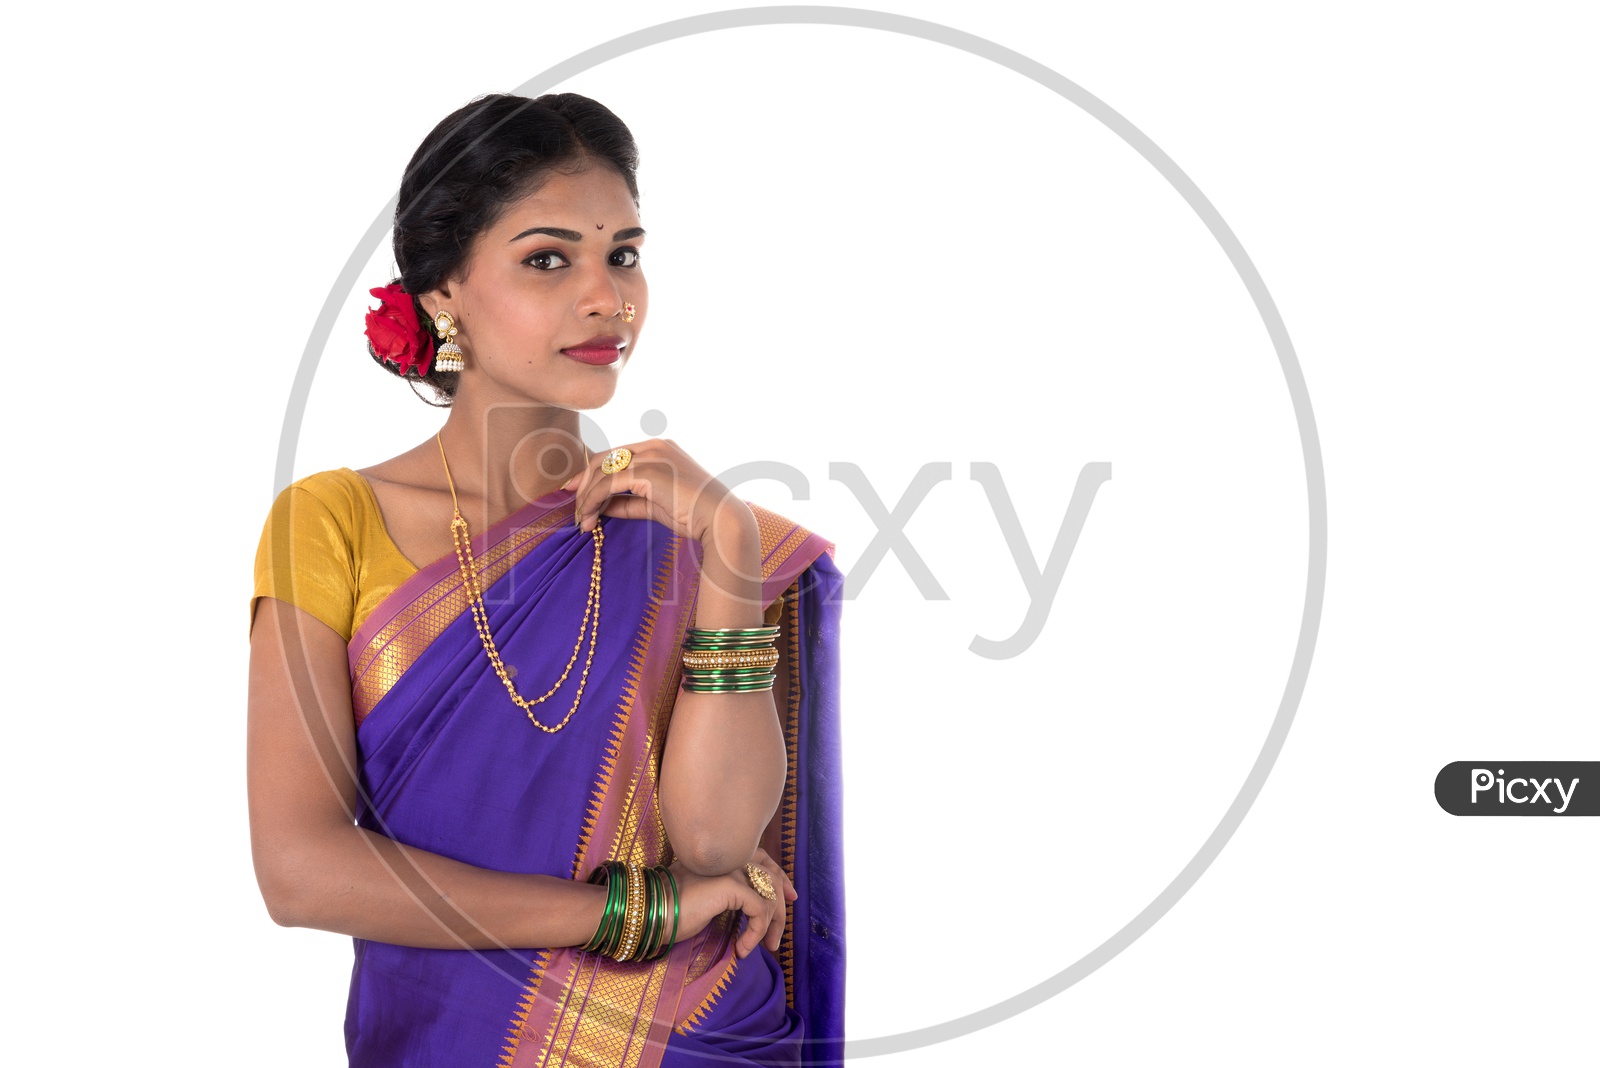 Image of Indian traditional Beautiful Woman Wearing an traditional Saree  And Posing On The Outdoor With a Smile Face-NP151403-Picxy